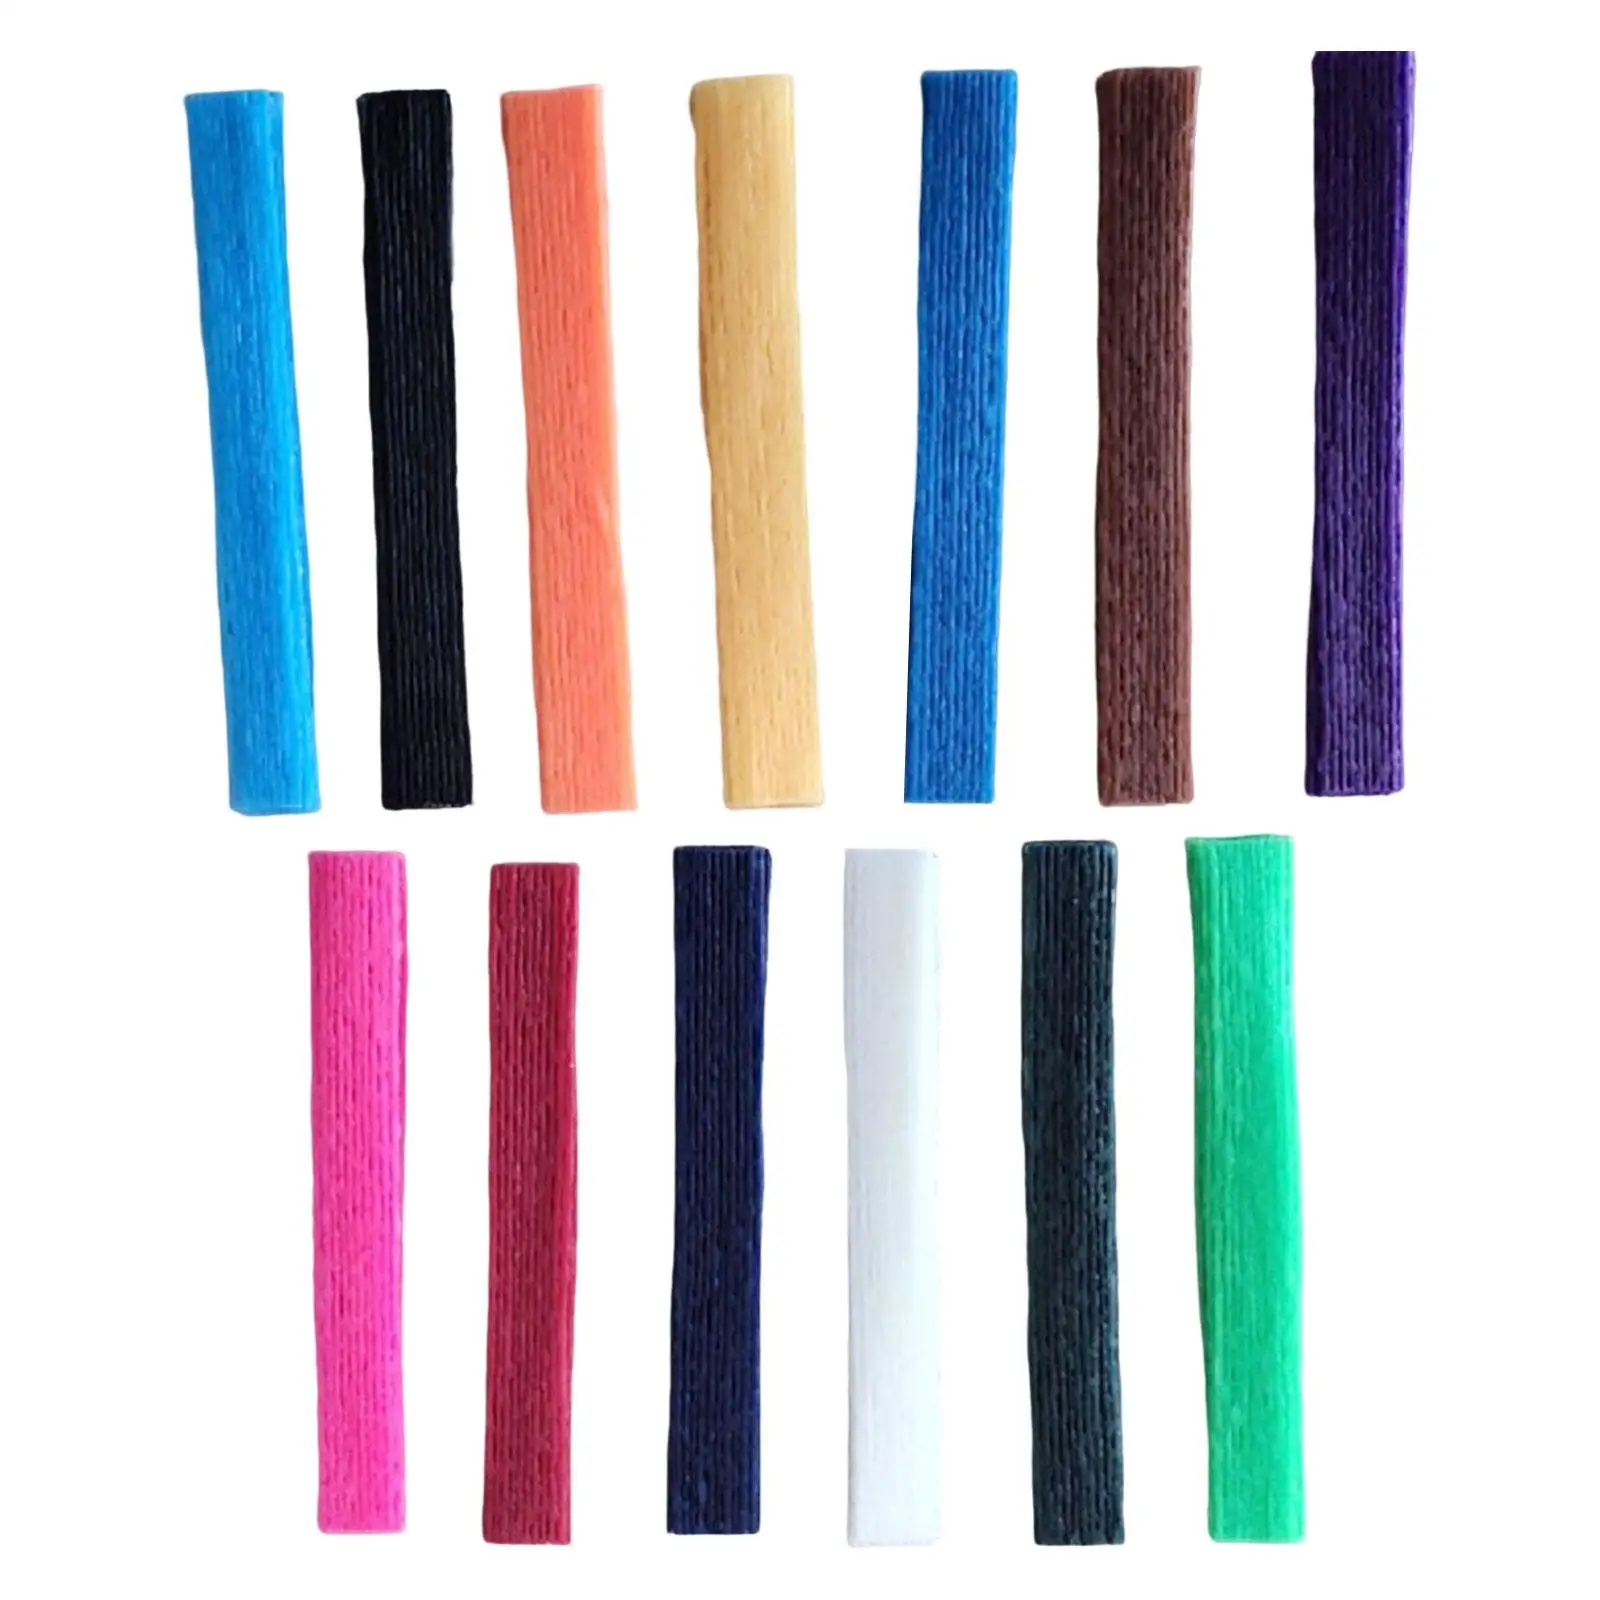 

520 Pieces Wax Craft Sticks for Kids Bendable Sticky Wax Yarn Wax Sticks for Child DIY Art Crafts Activity in 13 Colors Travel